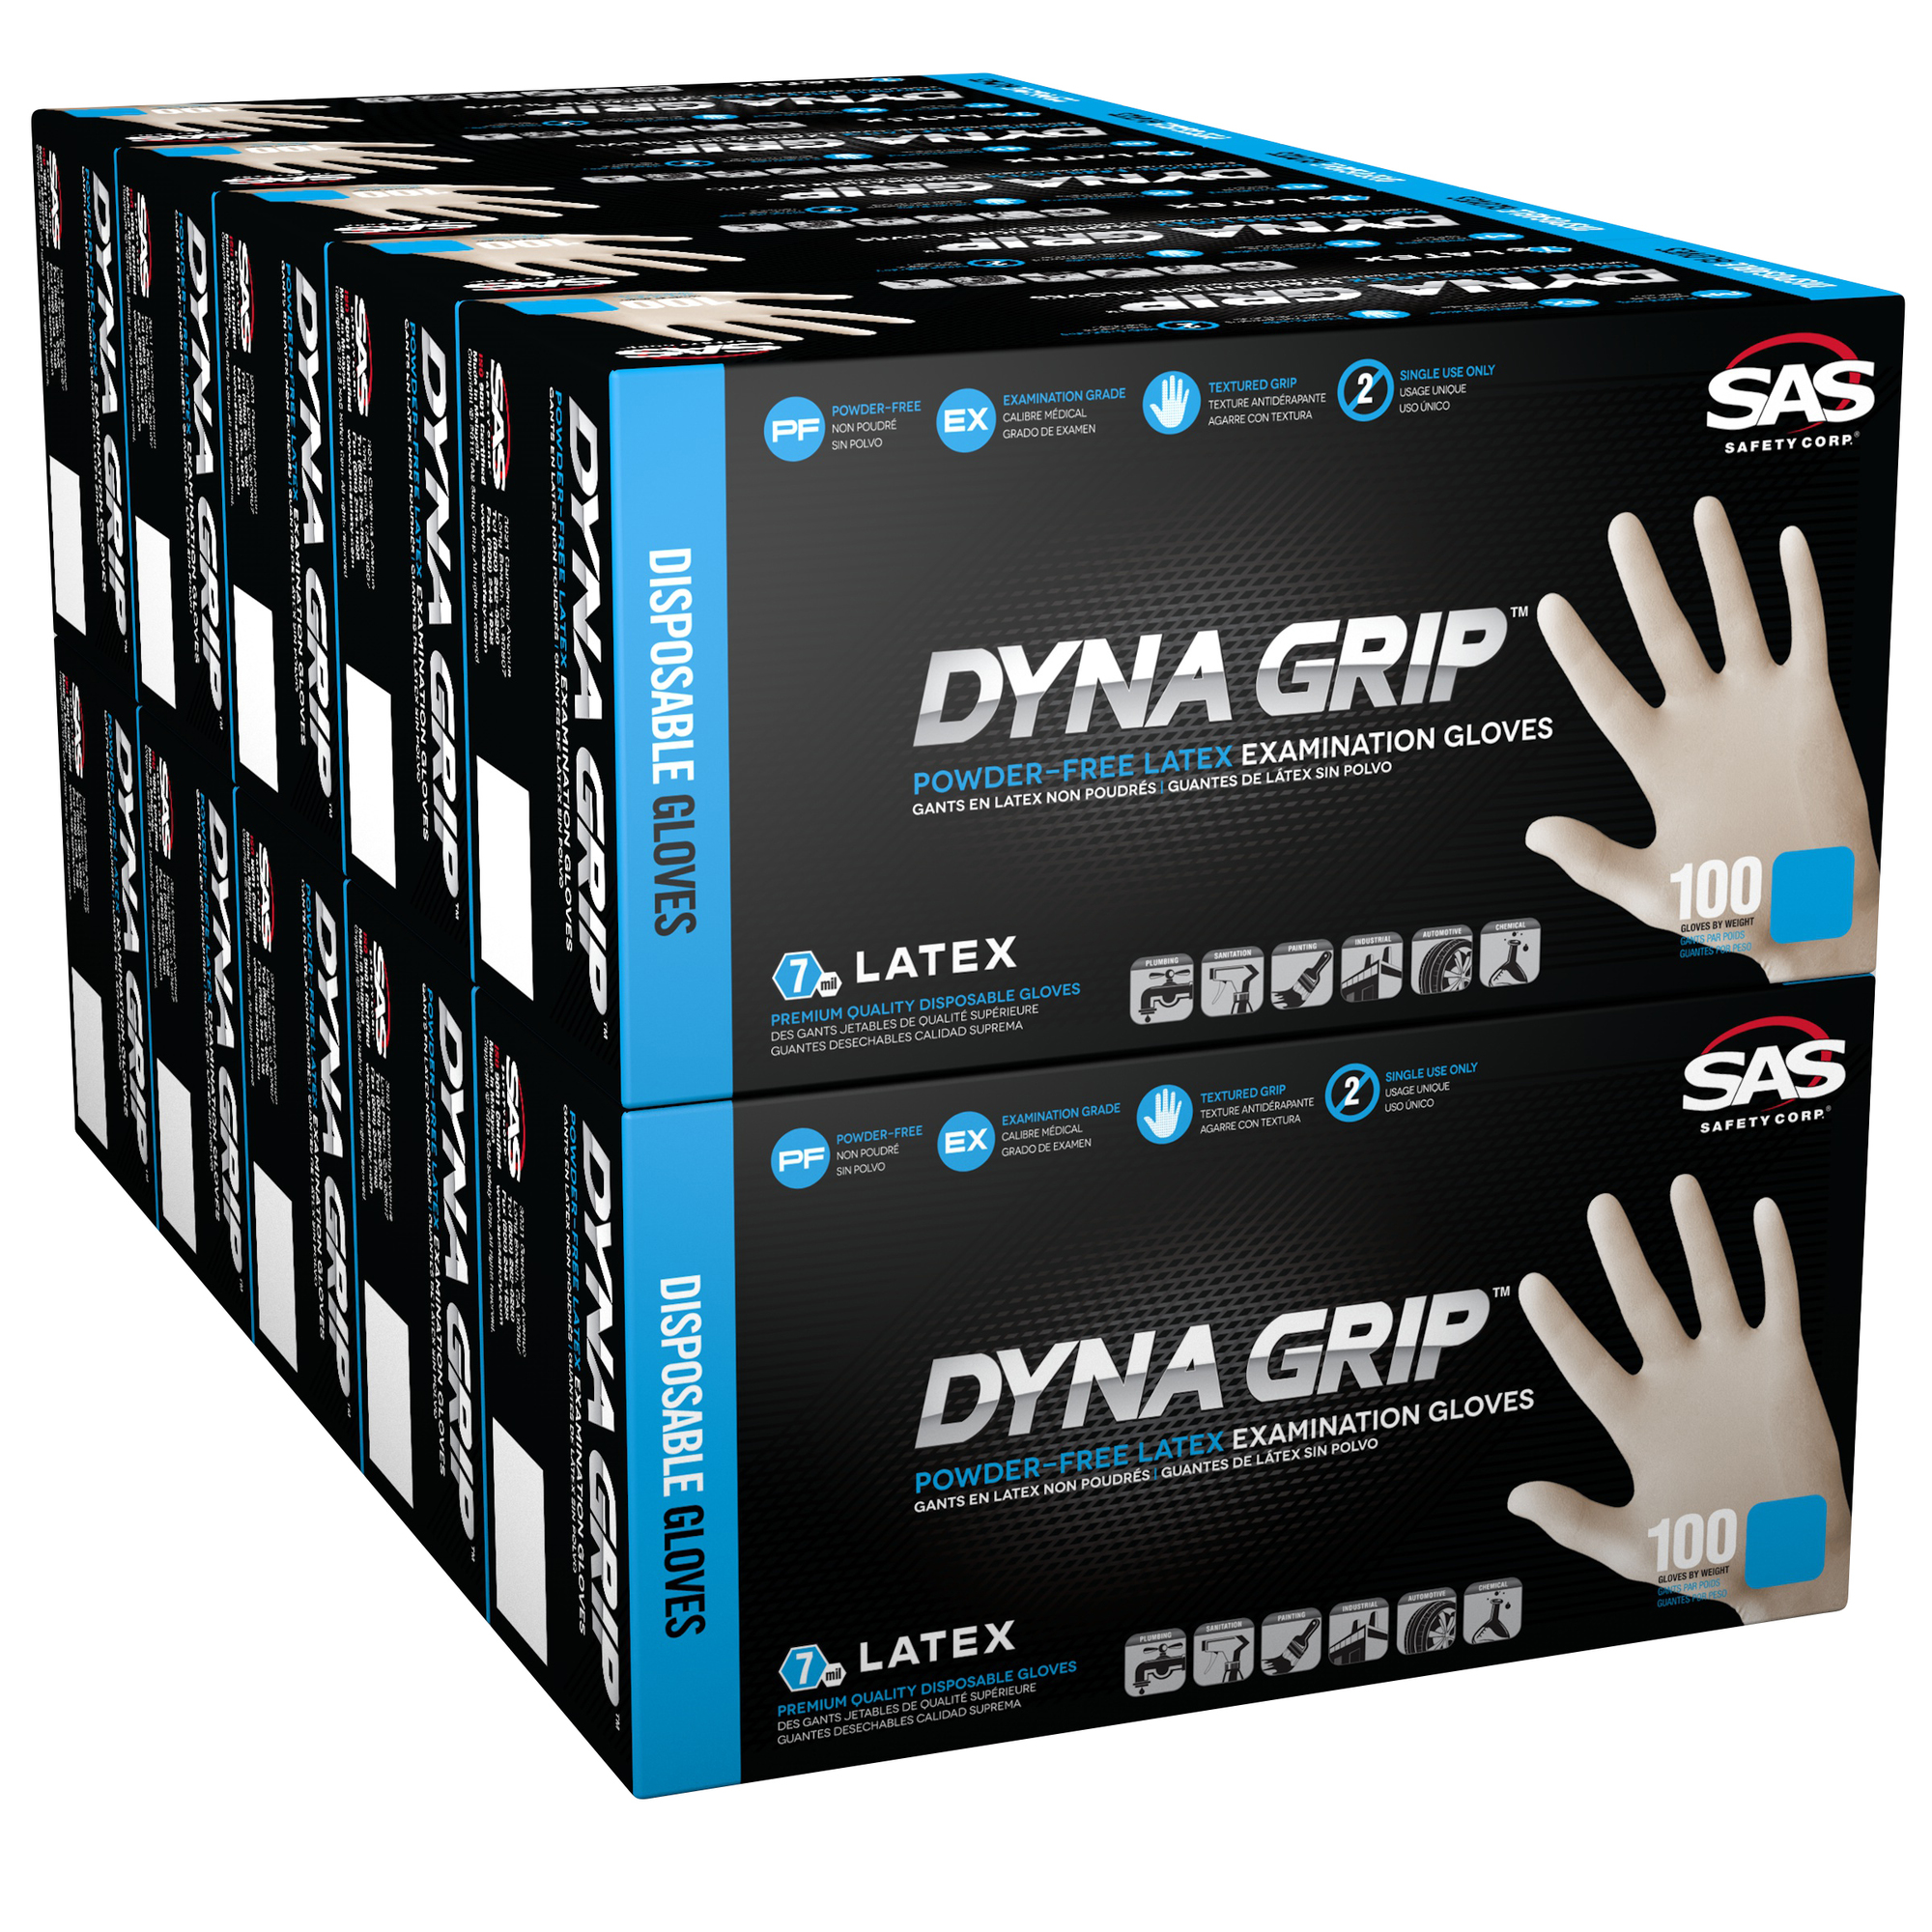 Dyna-Grip, Case of Dyna Grip PF Exam Latex 7 mil 1000 Glove, Size L, Color White, Included (qty.) 1000 Model 650-1003CASE